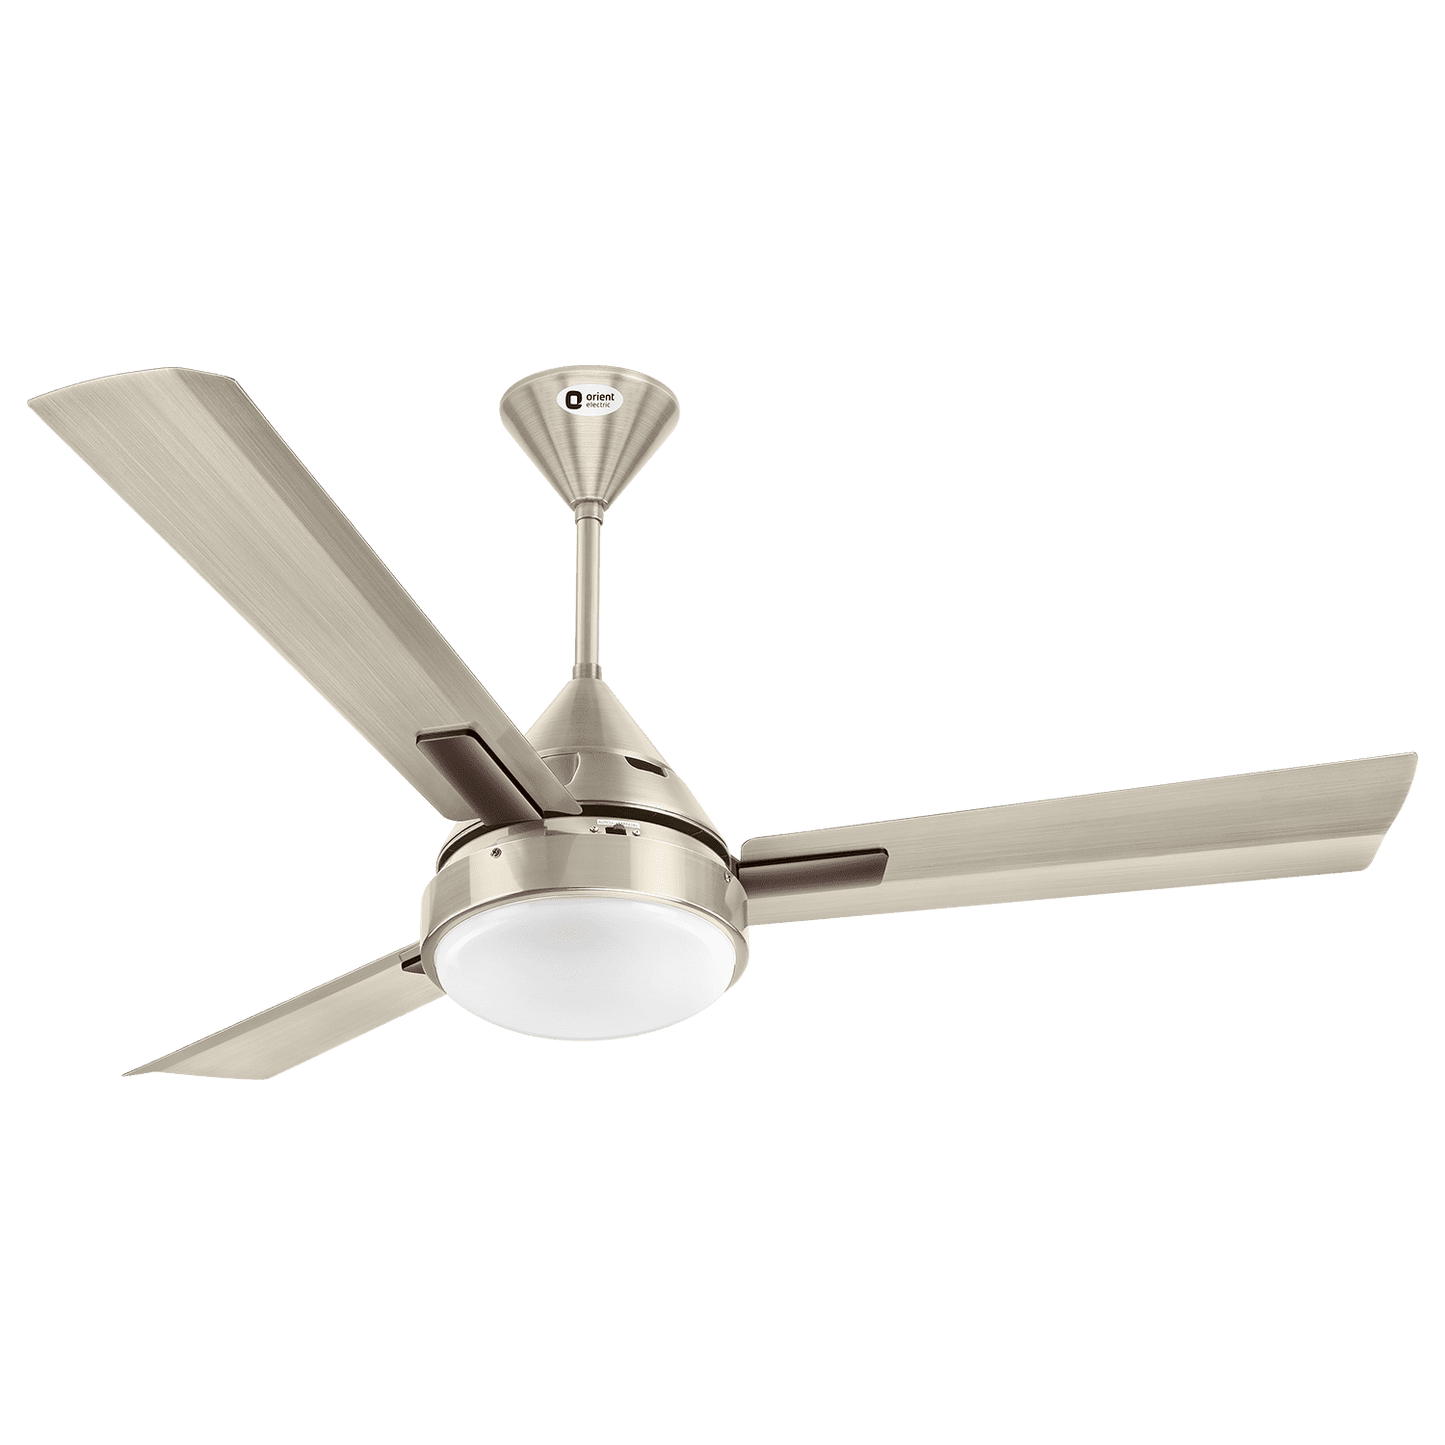 With Remote Underlight Ceiling Fan